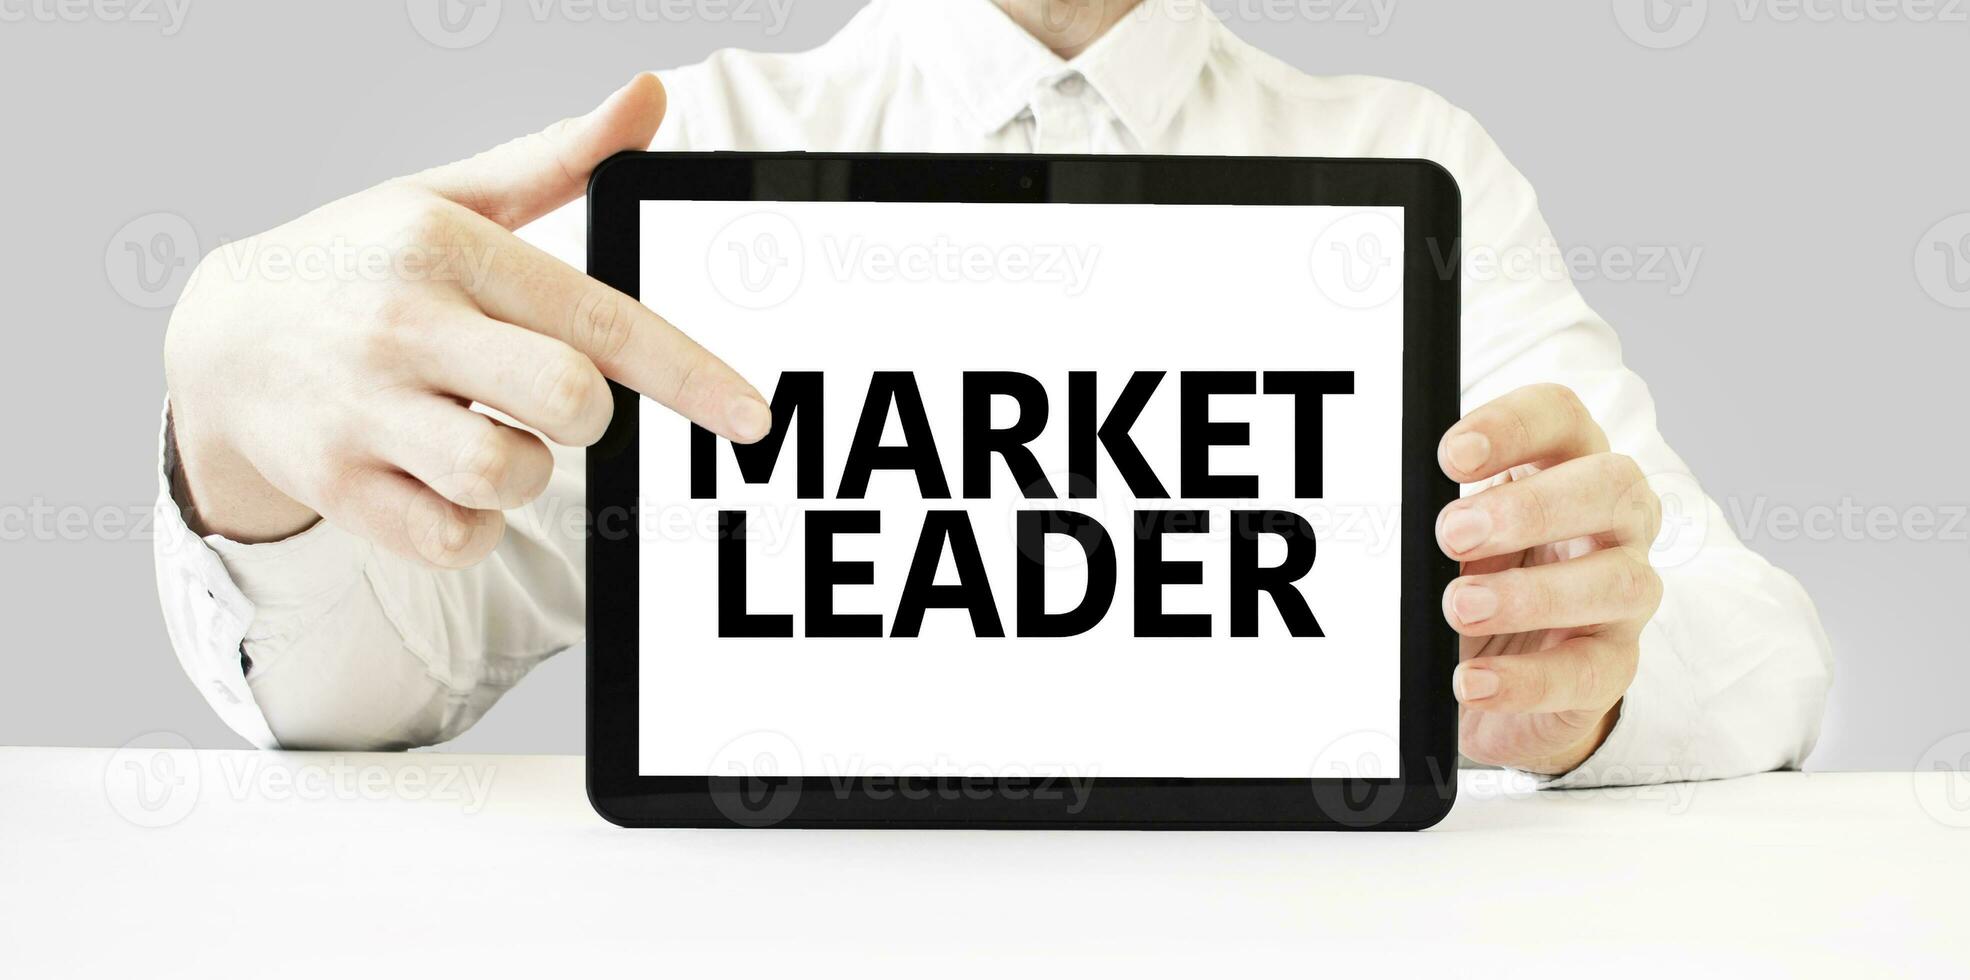 Text MARKET LEADER on tablet display in businessman hands on the white background. Business concept photo